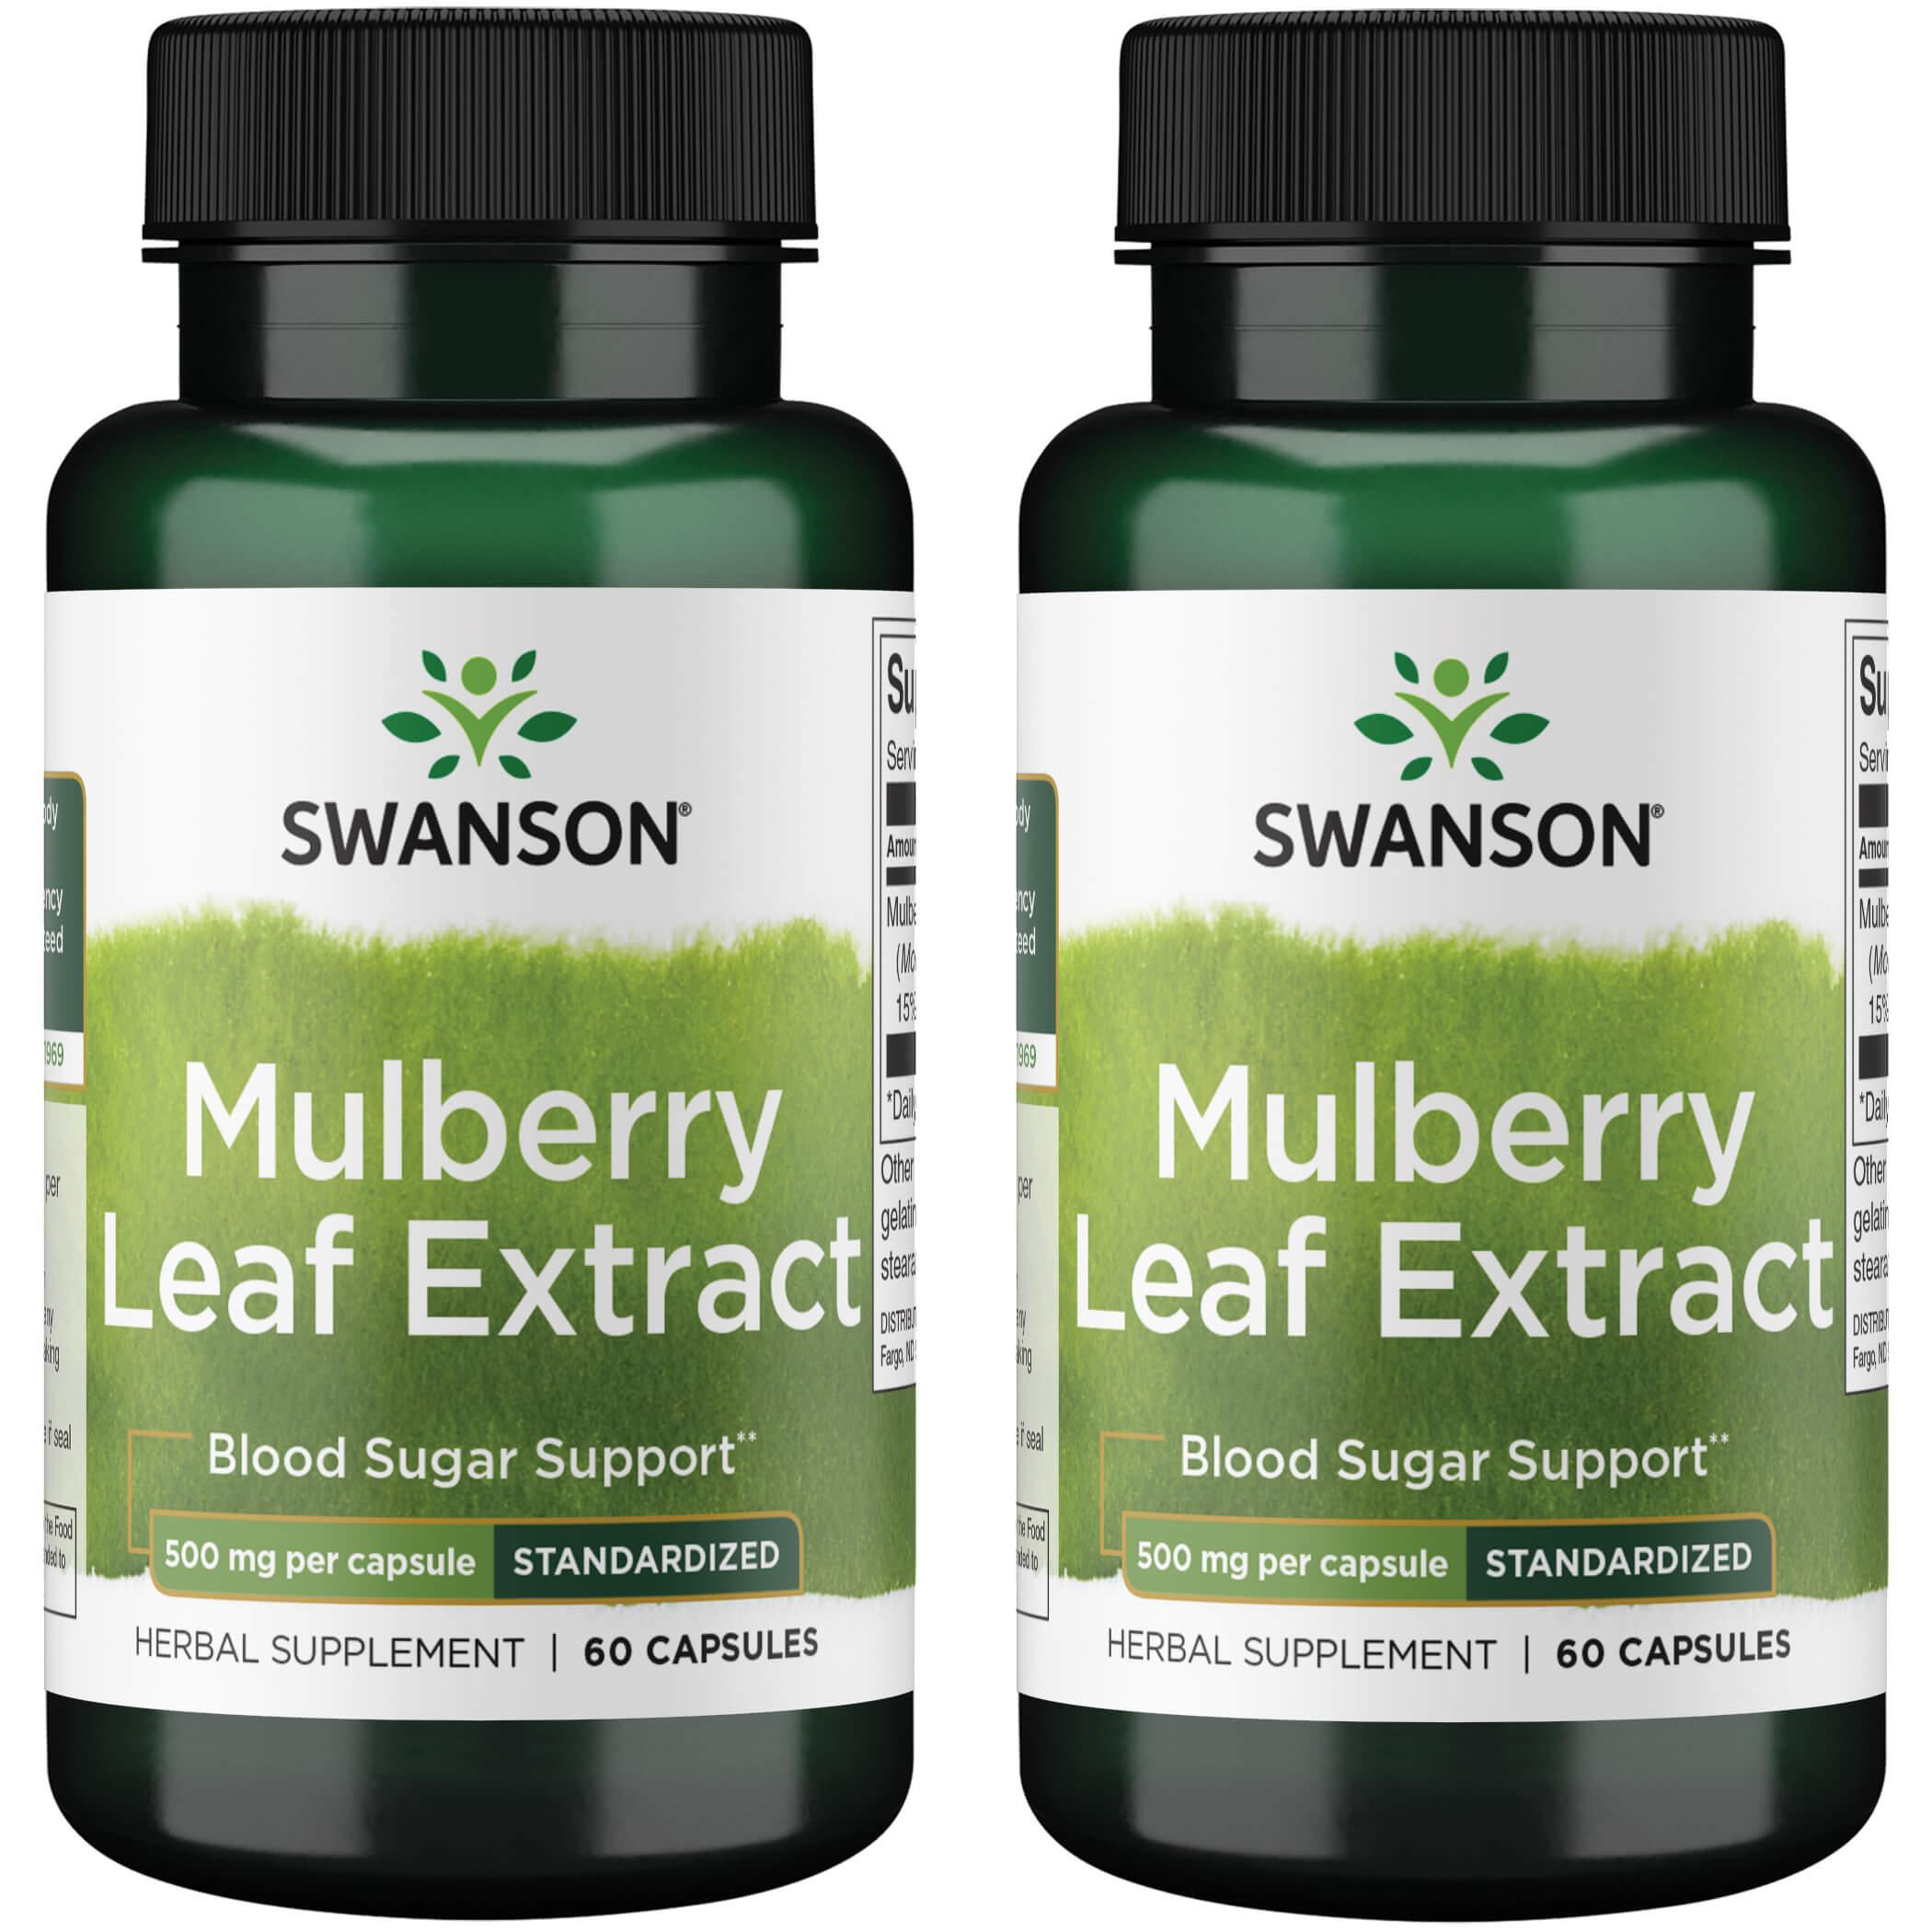 Swanson Superior Herbs Mulberry Leaf Extract - Standardized 2 Pack Vitamin 500 mg 60 Caps